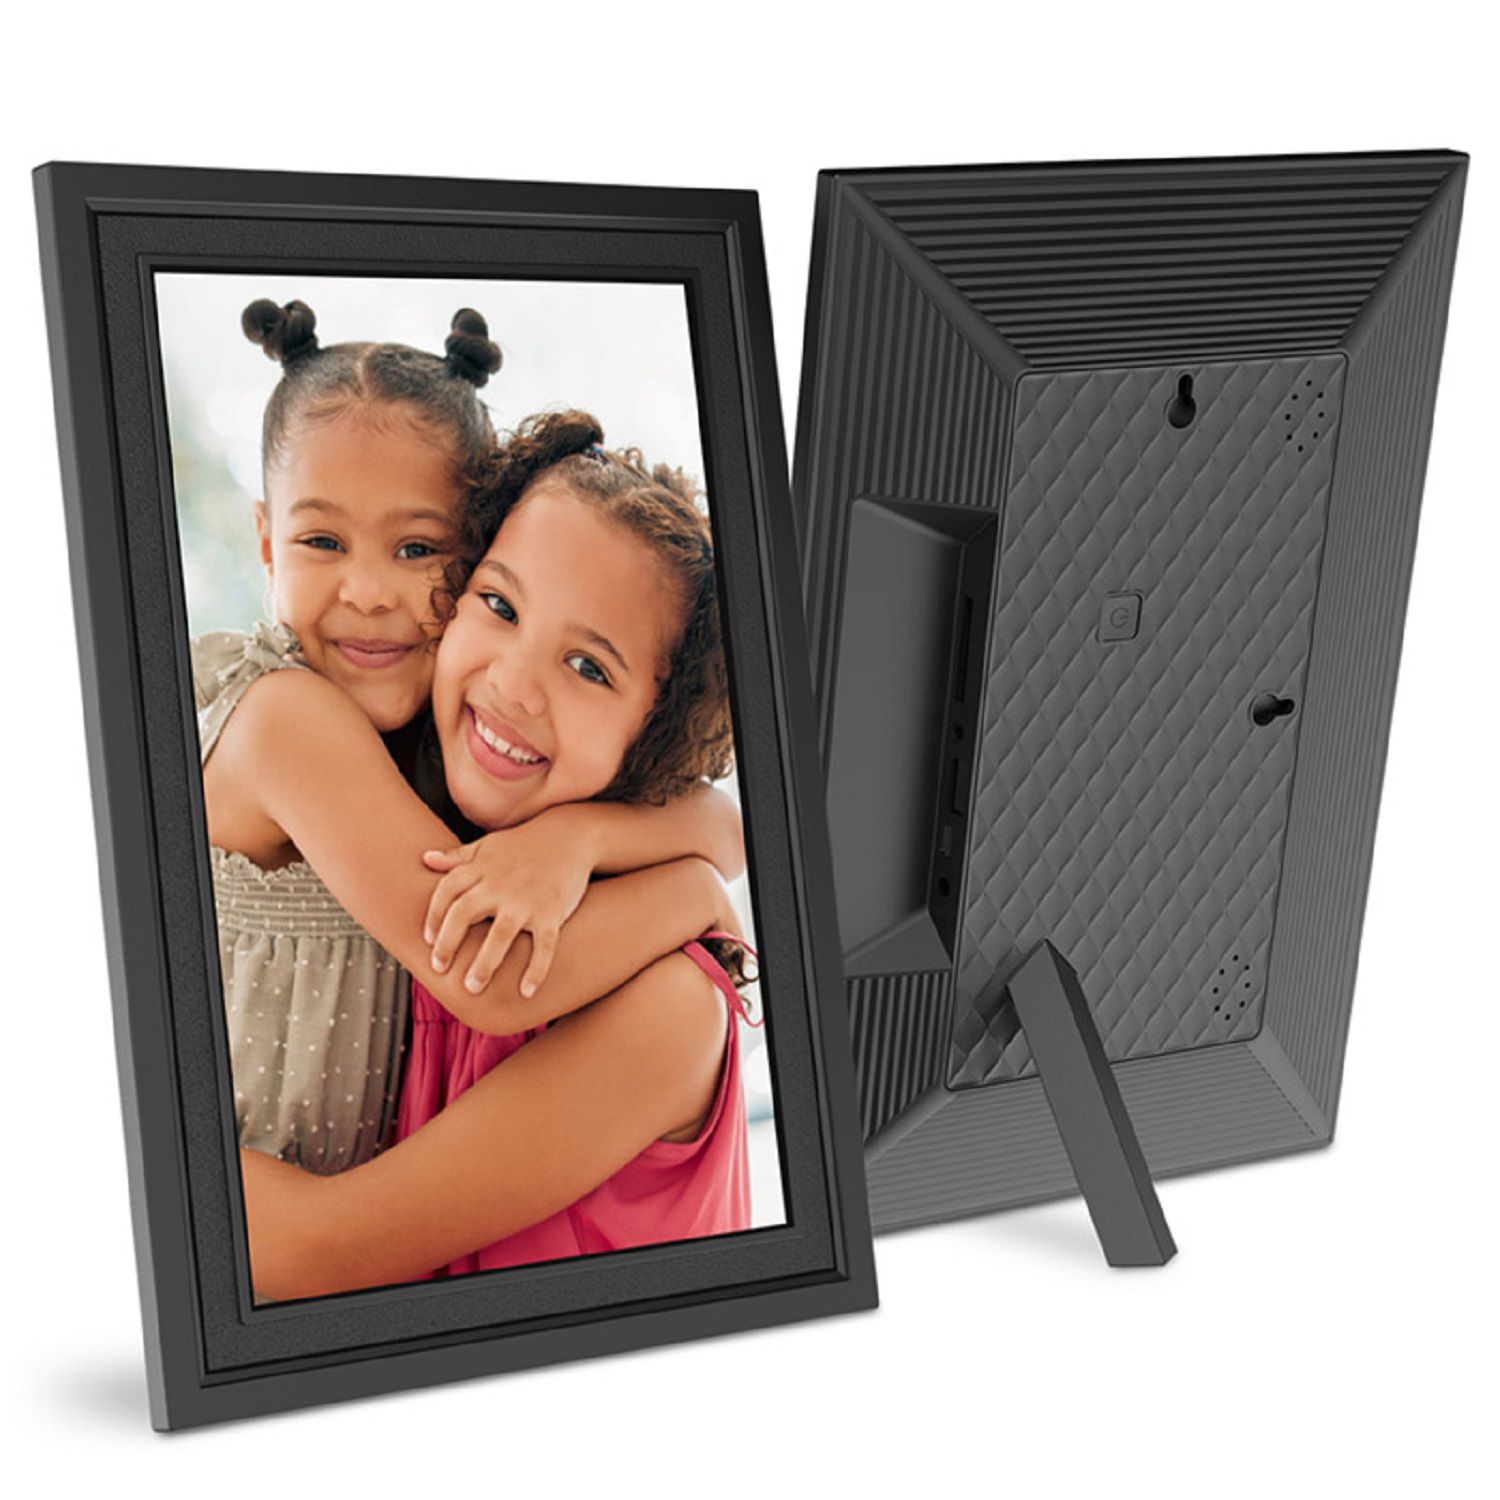 Pipilo Press large photo album for 1000 photos, 4x6 photo albums with  pockets, grey linen cover (